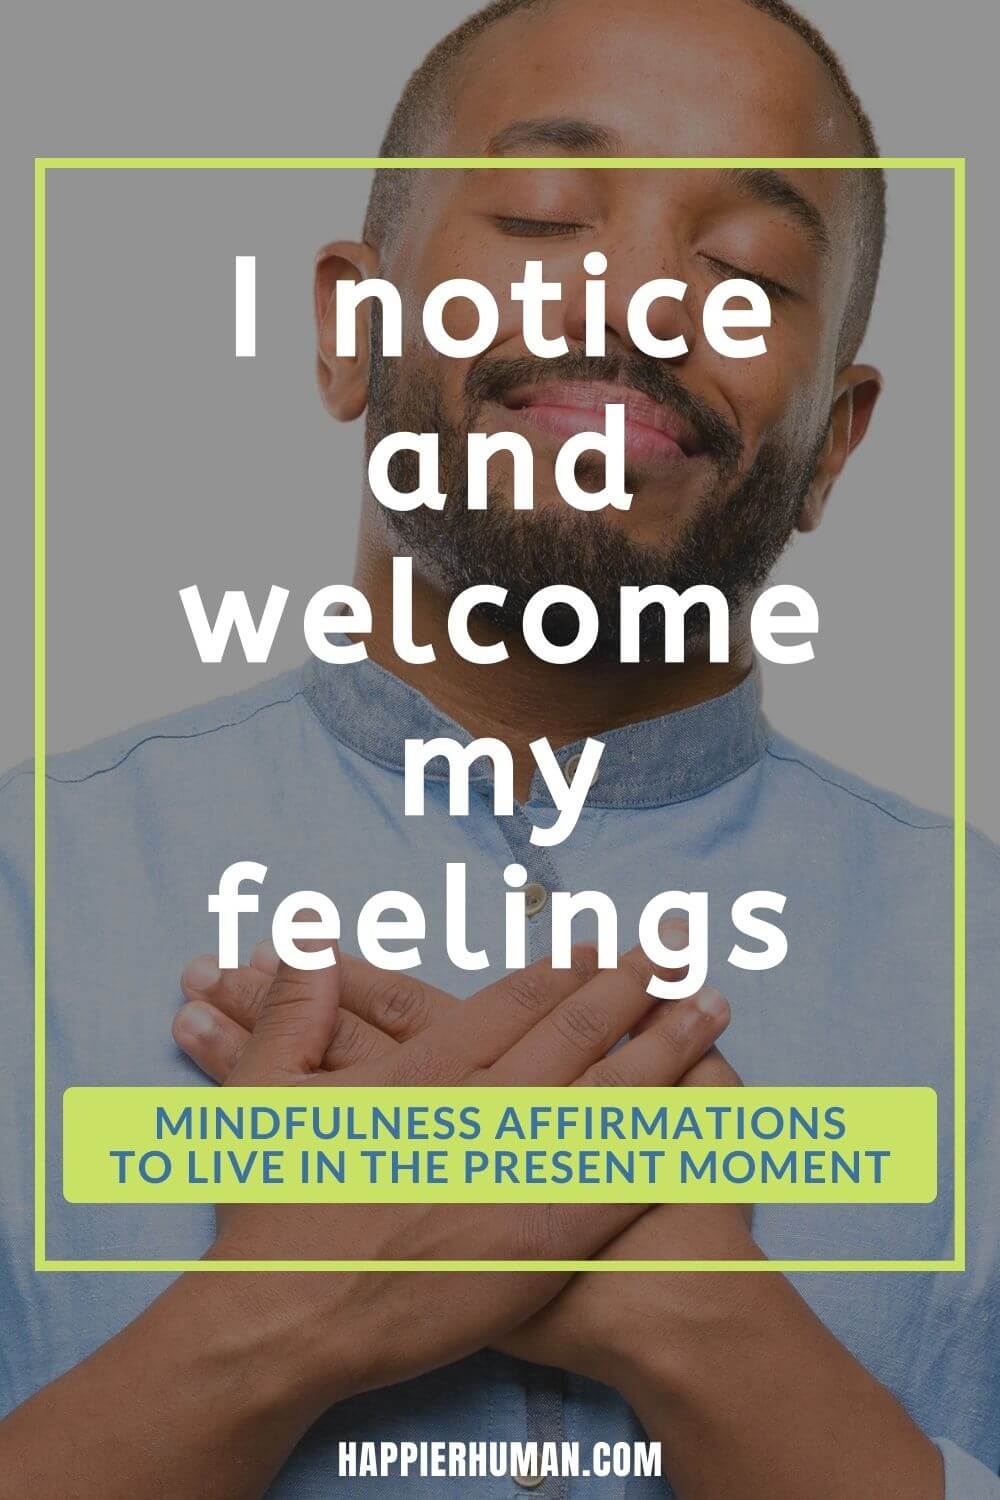 Mindfulness Affirmations - I notice and welcome my feelings | mindfulness quotes | mindful affirmations app | mindful affirmation cards